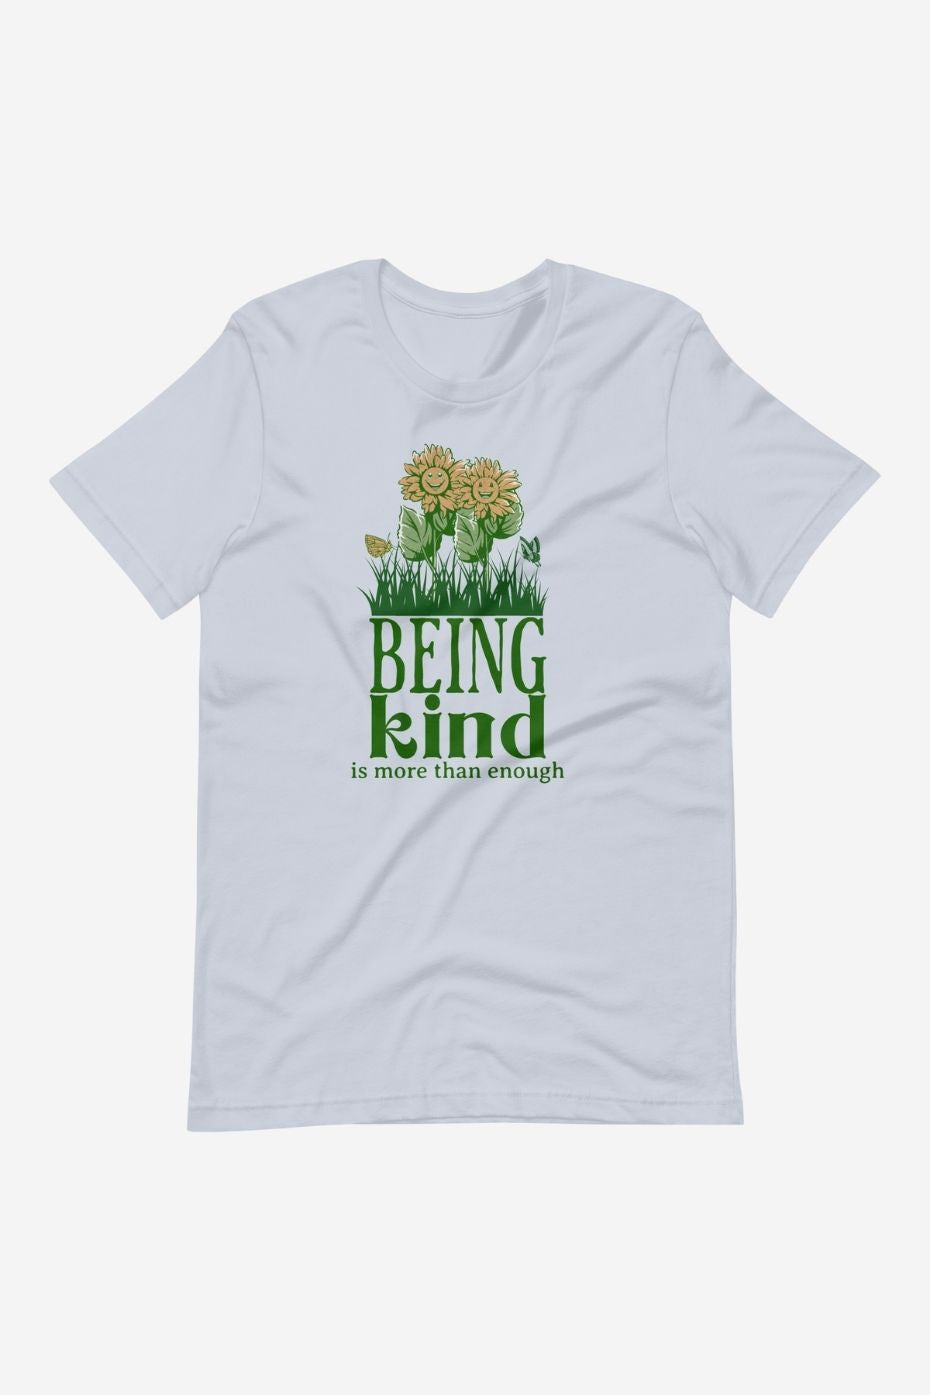 Being Kind is More Than Enough - Unisex t-shirt